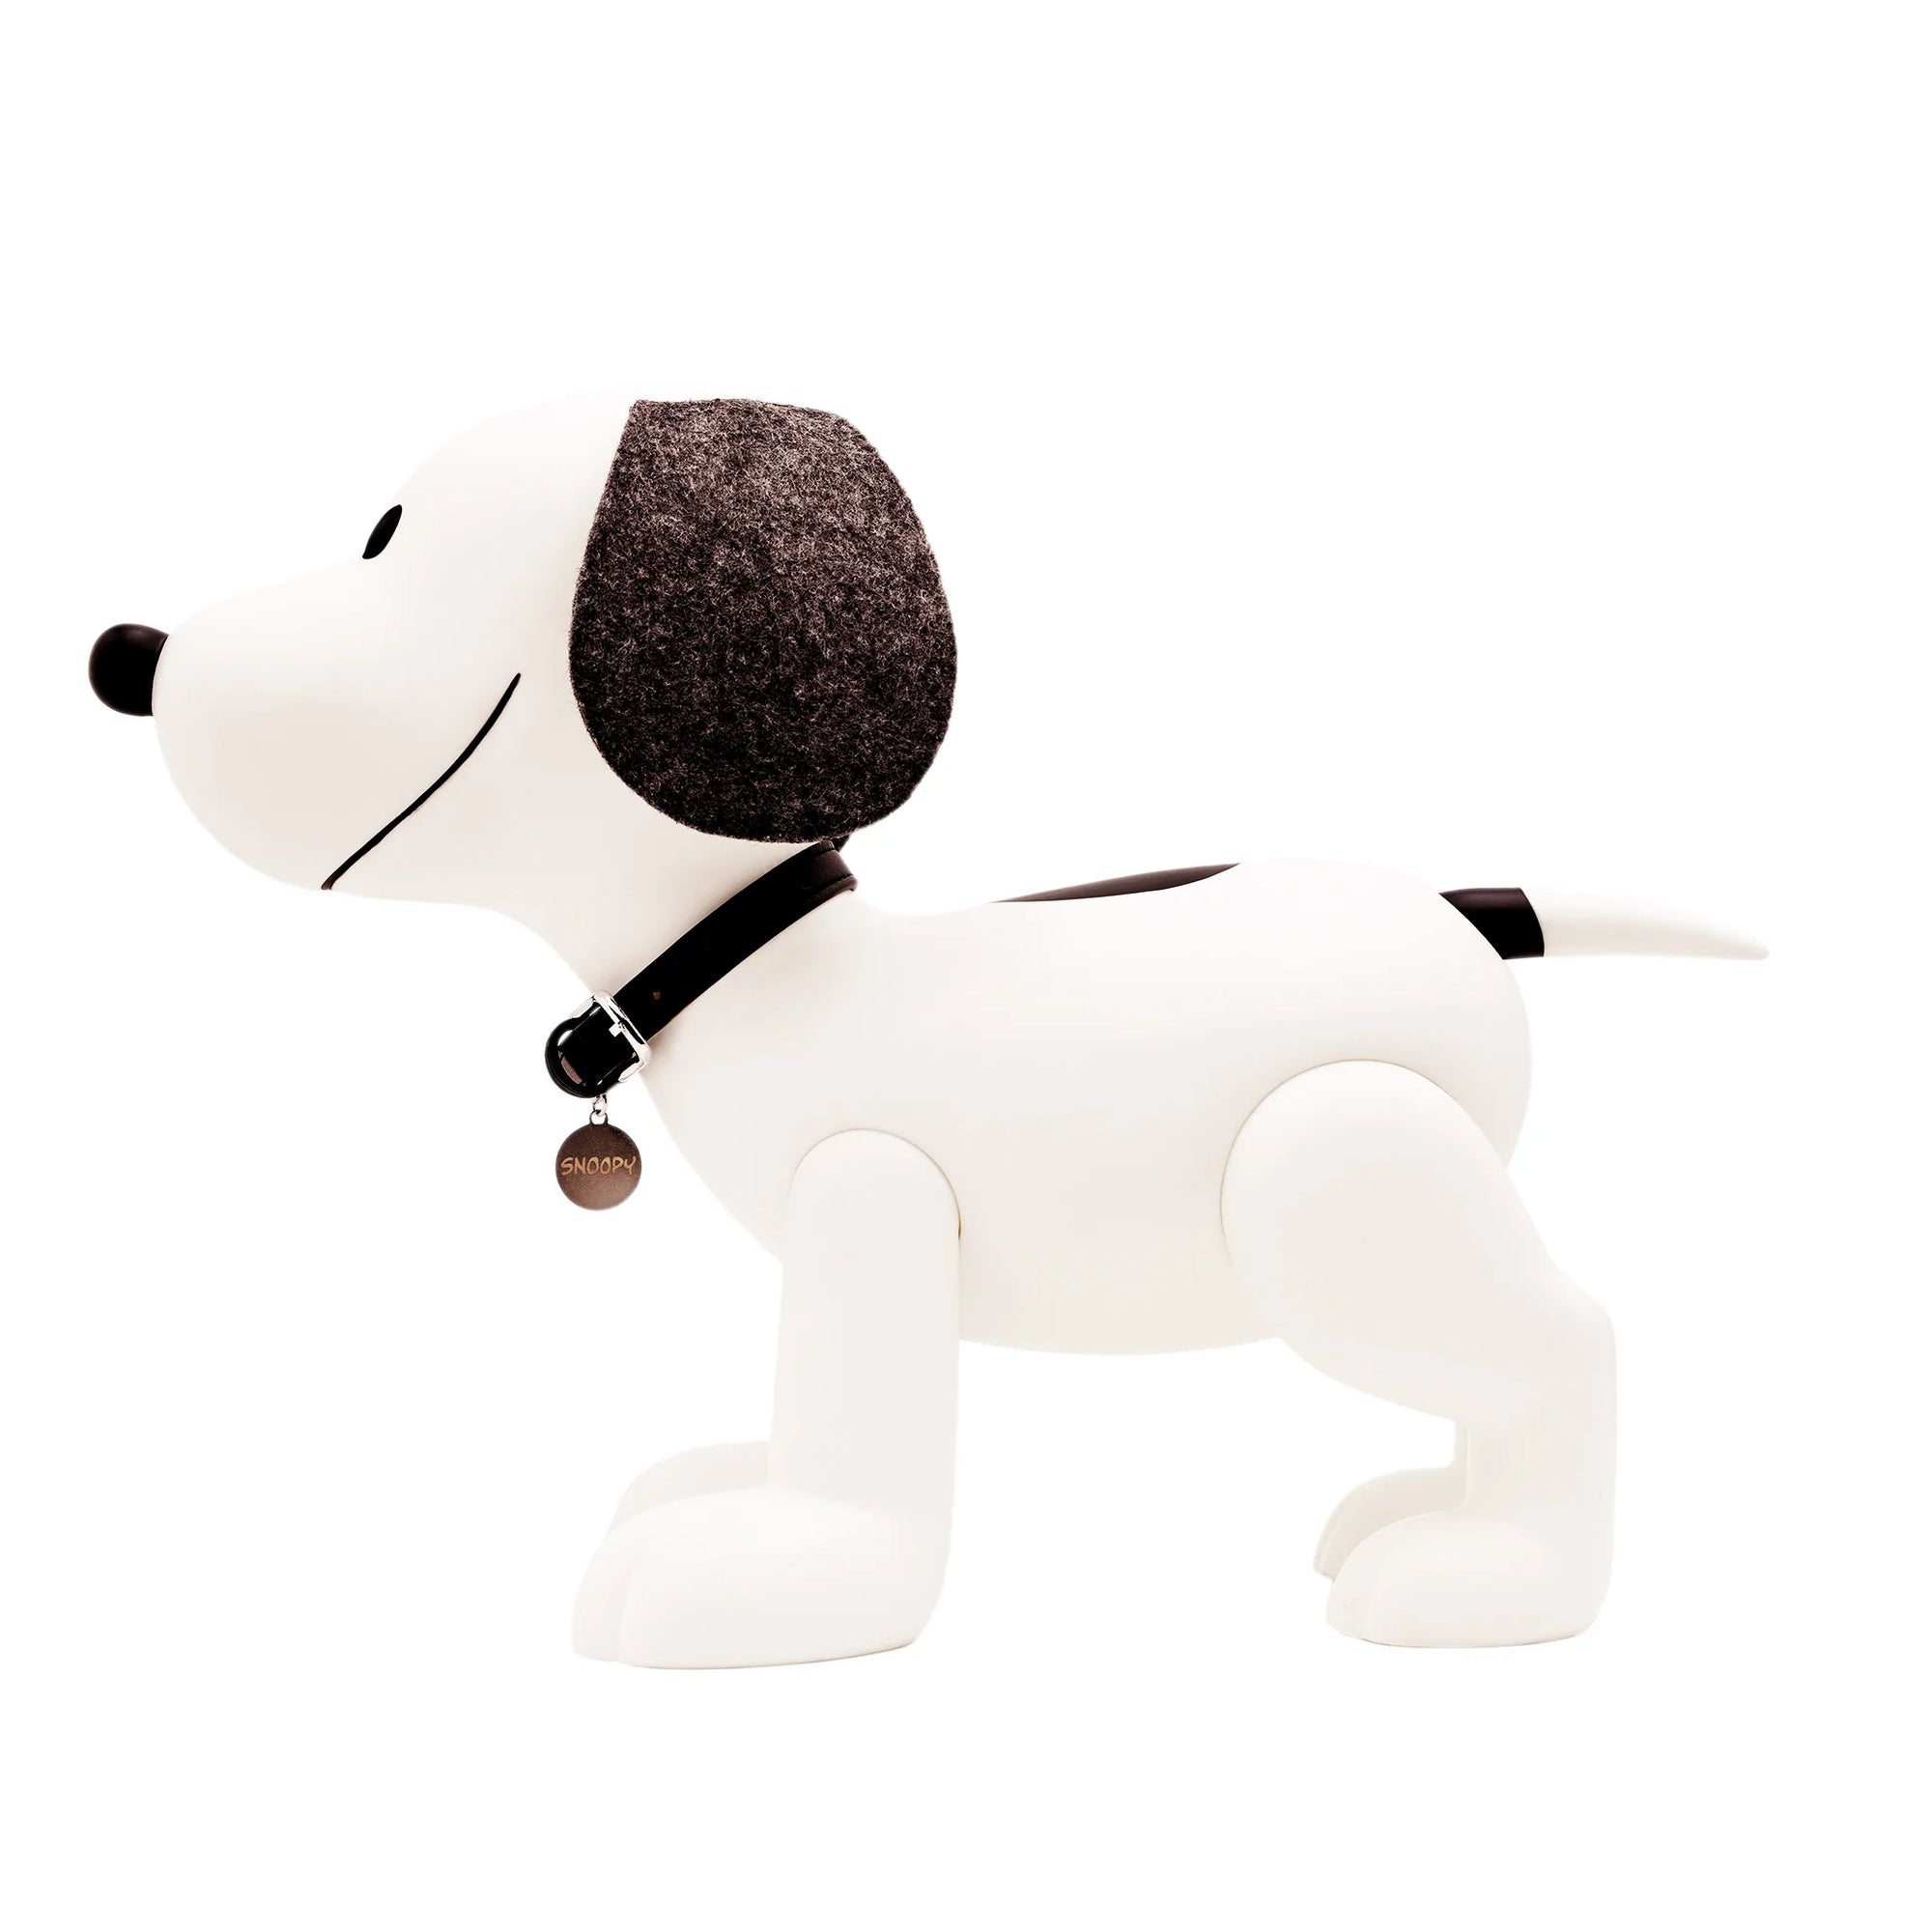 Snoopy (Newsprint Grayscale)  12" Vinyl Collectible by Super7